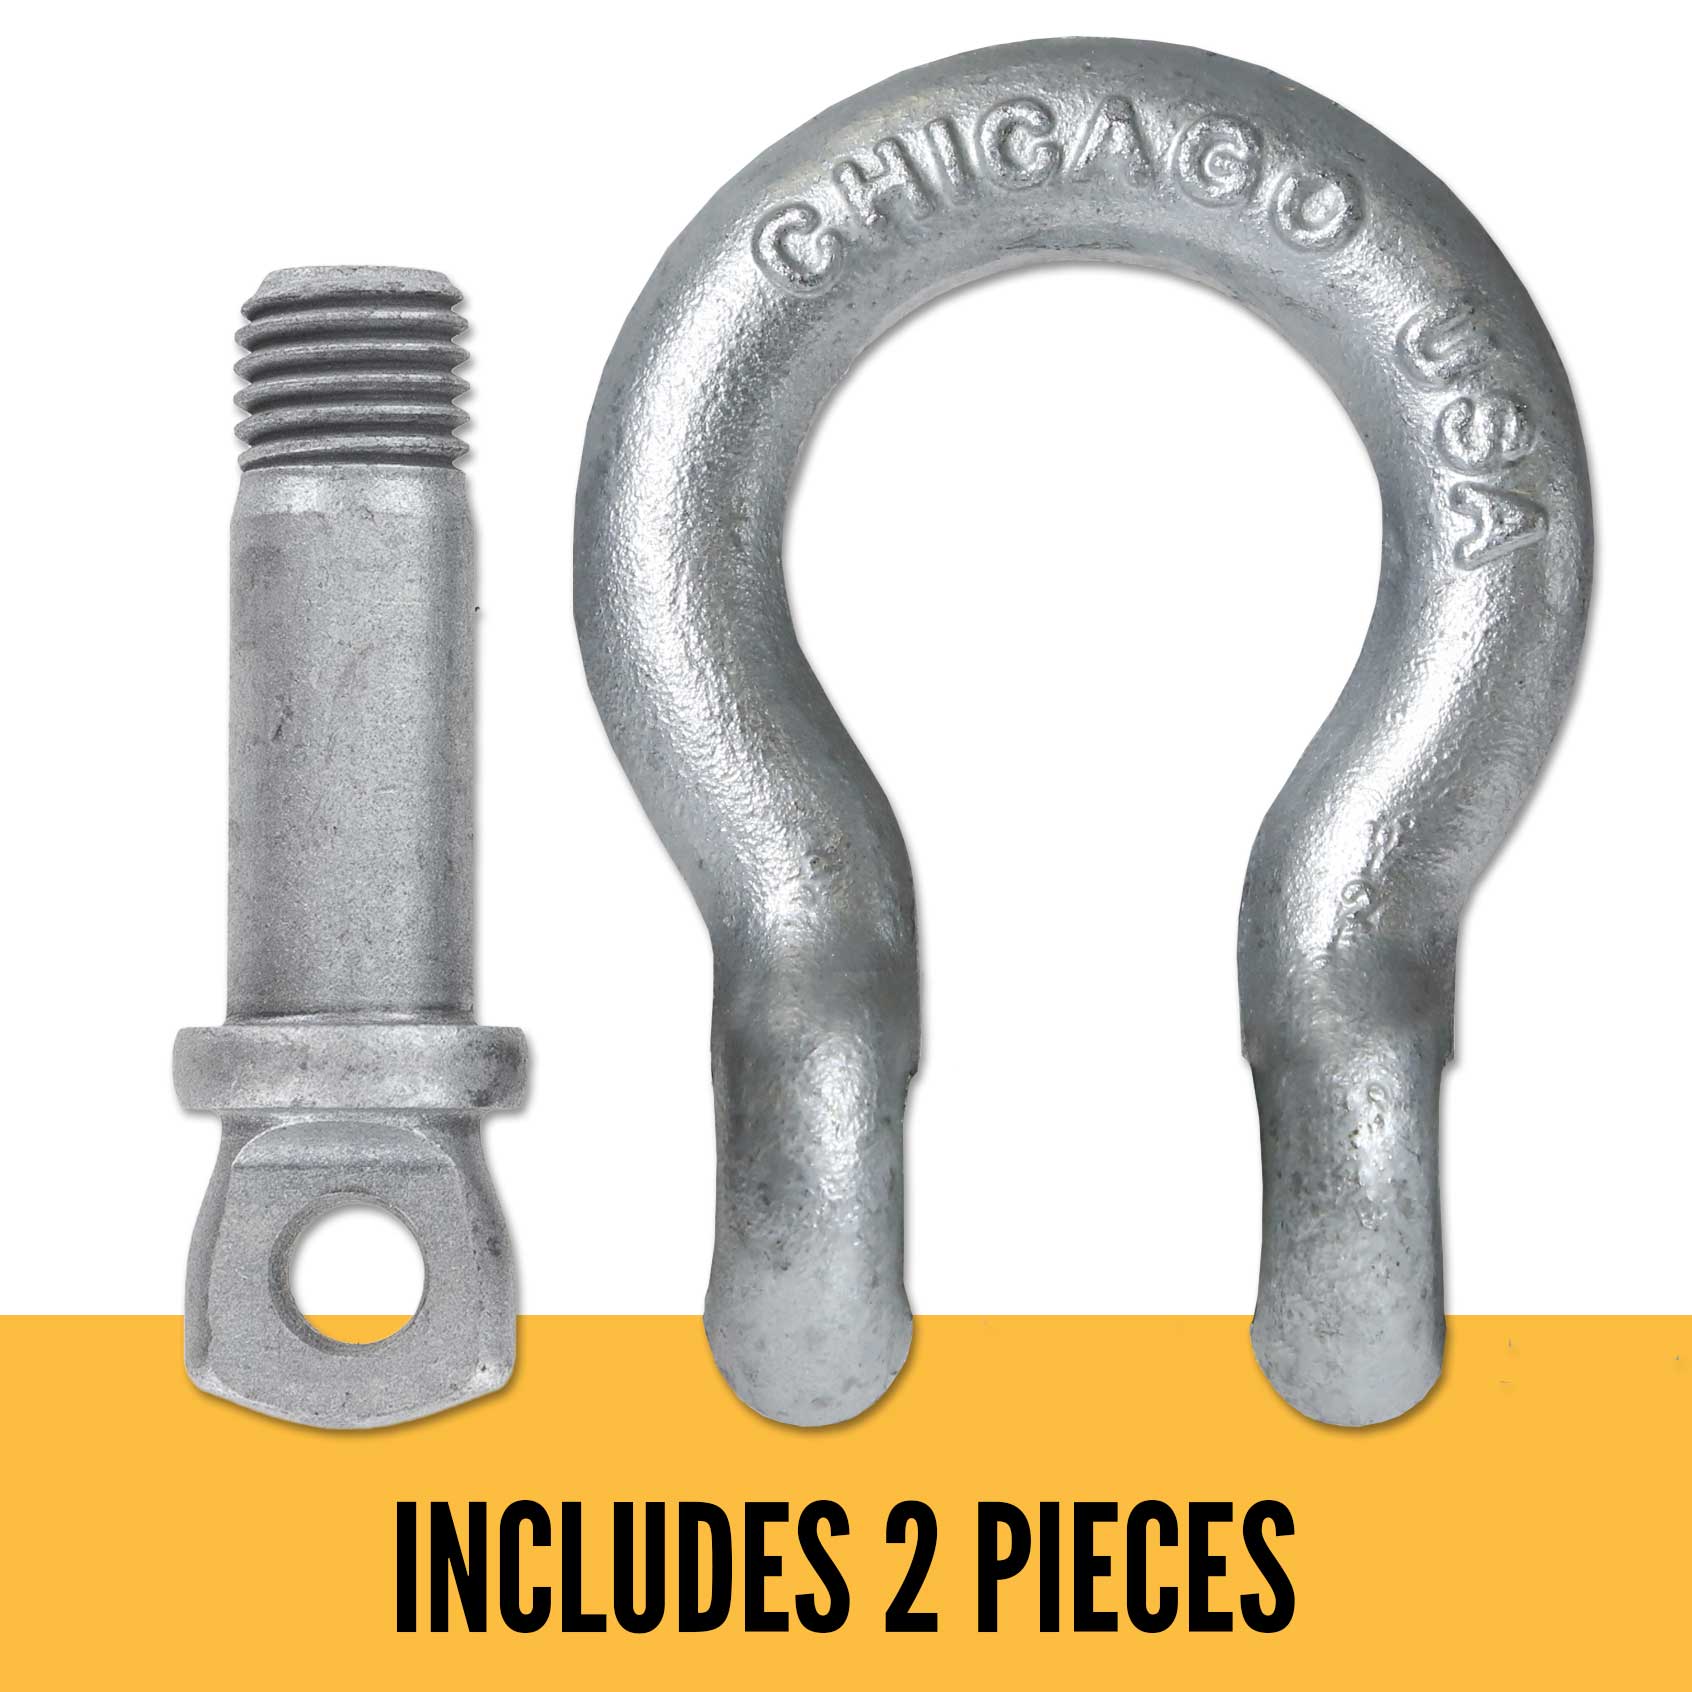 Screw Pin Anchor Shackle - Chicago Hardware - 1/4" Galvanized Steel - .5 Ton parts of a shackle